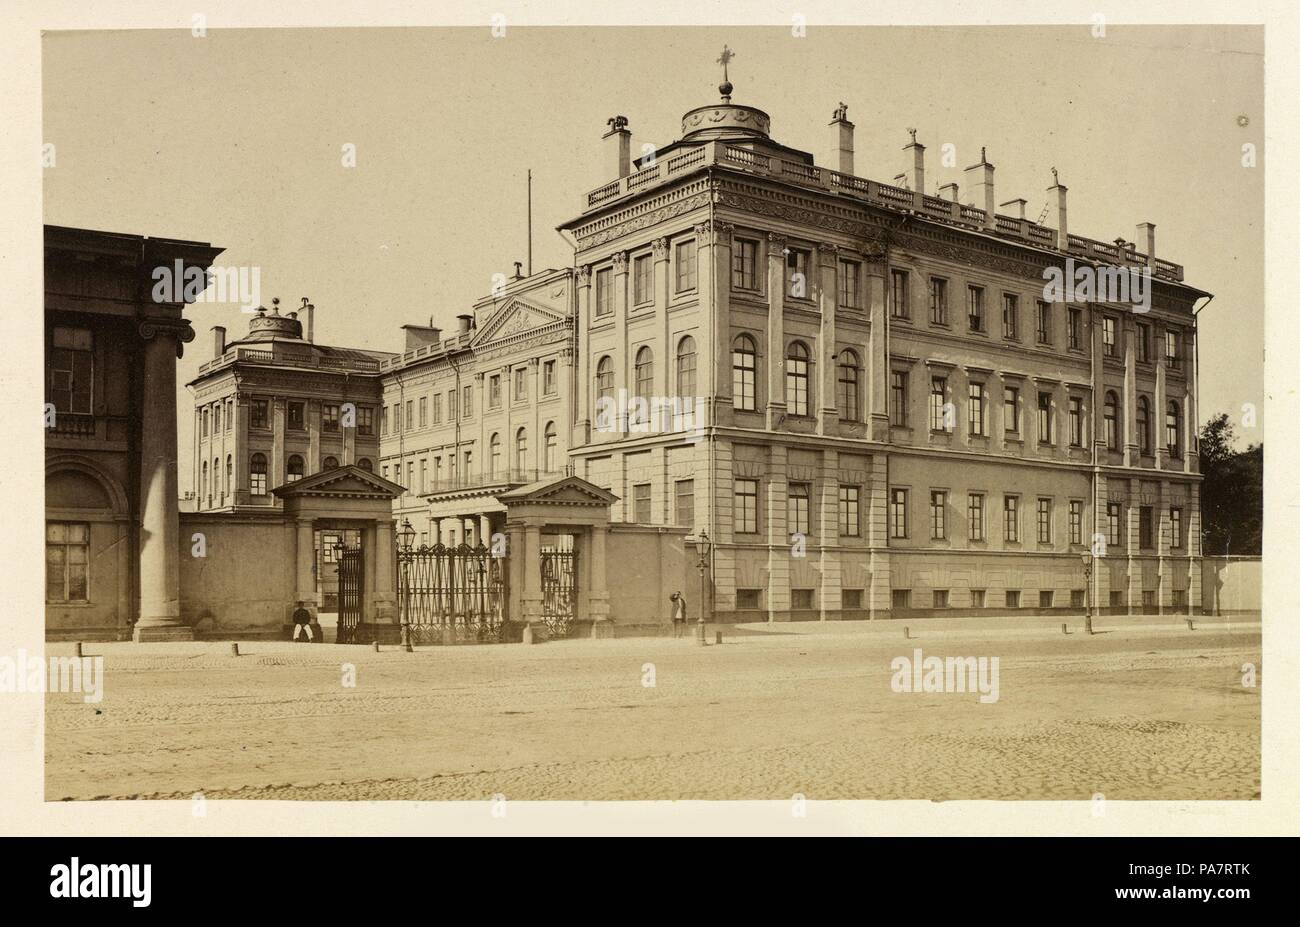 The Anichkov Palace in Saint Petersburg. Museum: Russian State Film and Photo Archive, Krasnogorsk. Stock Photo